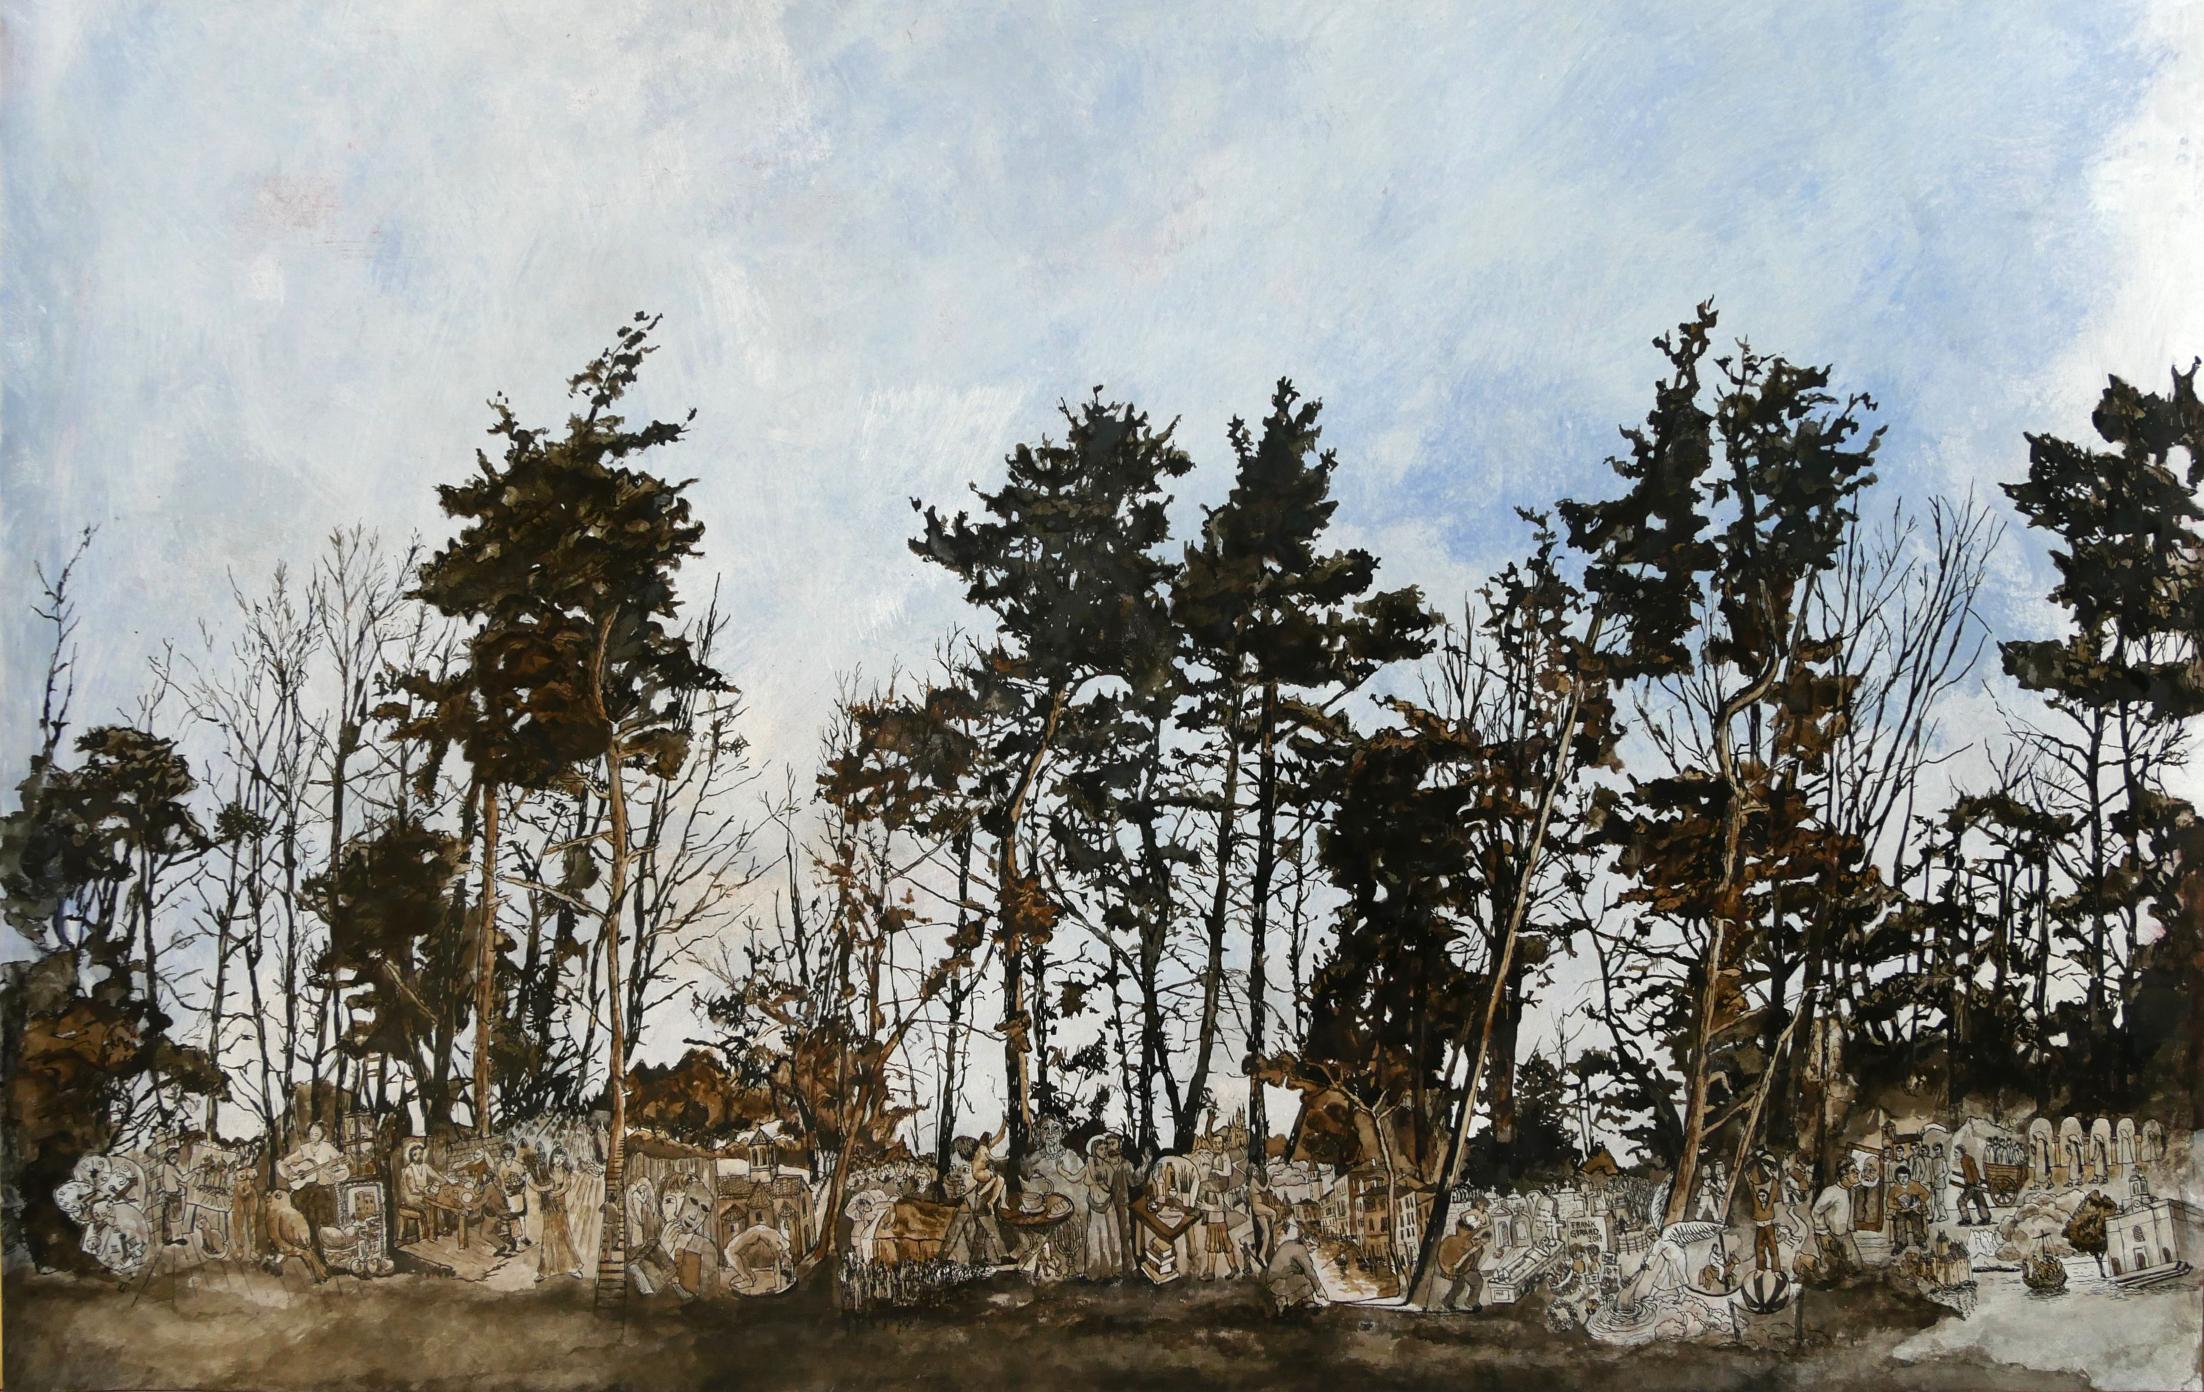 "We Two", Trees Inhabited by Human in Nature, Drawing with Pigments on Paper